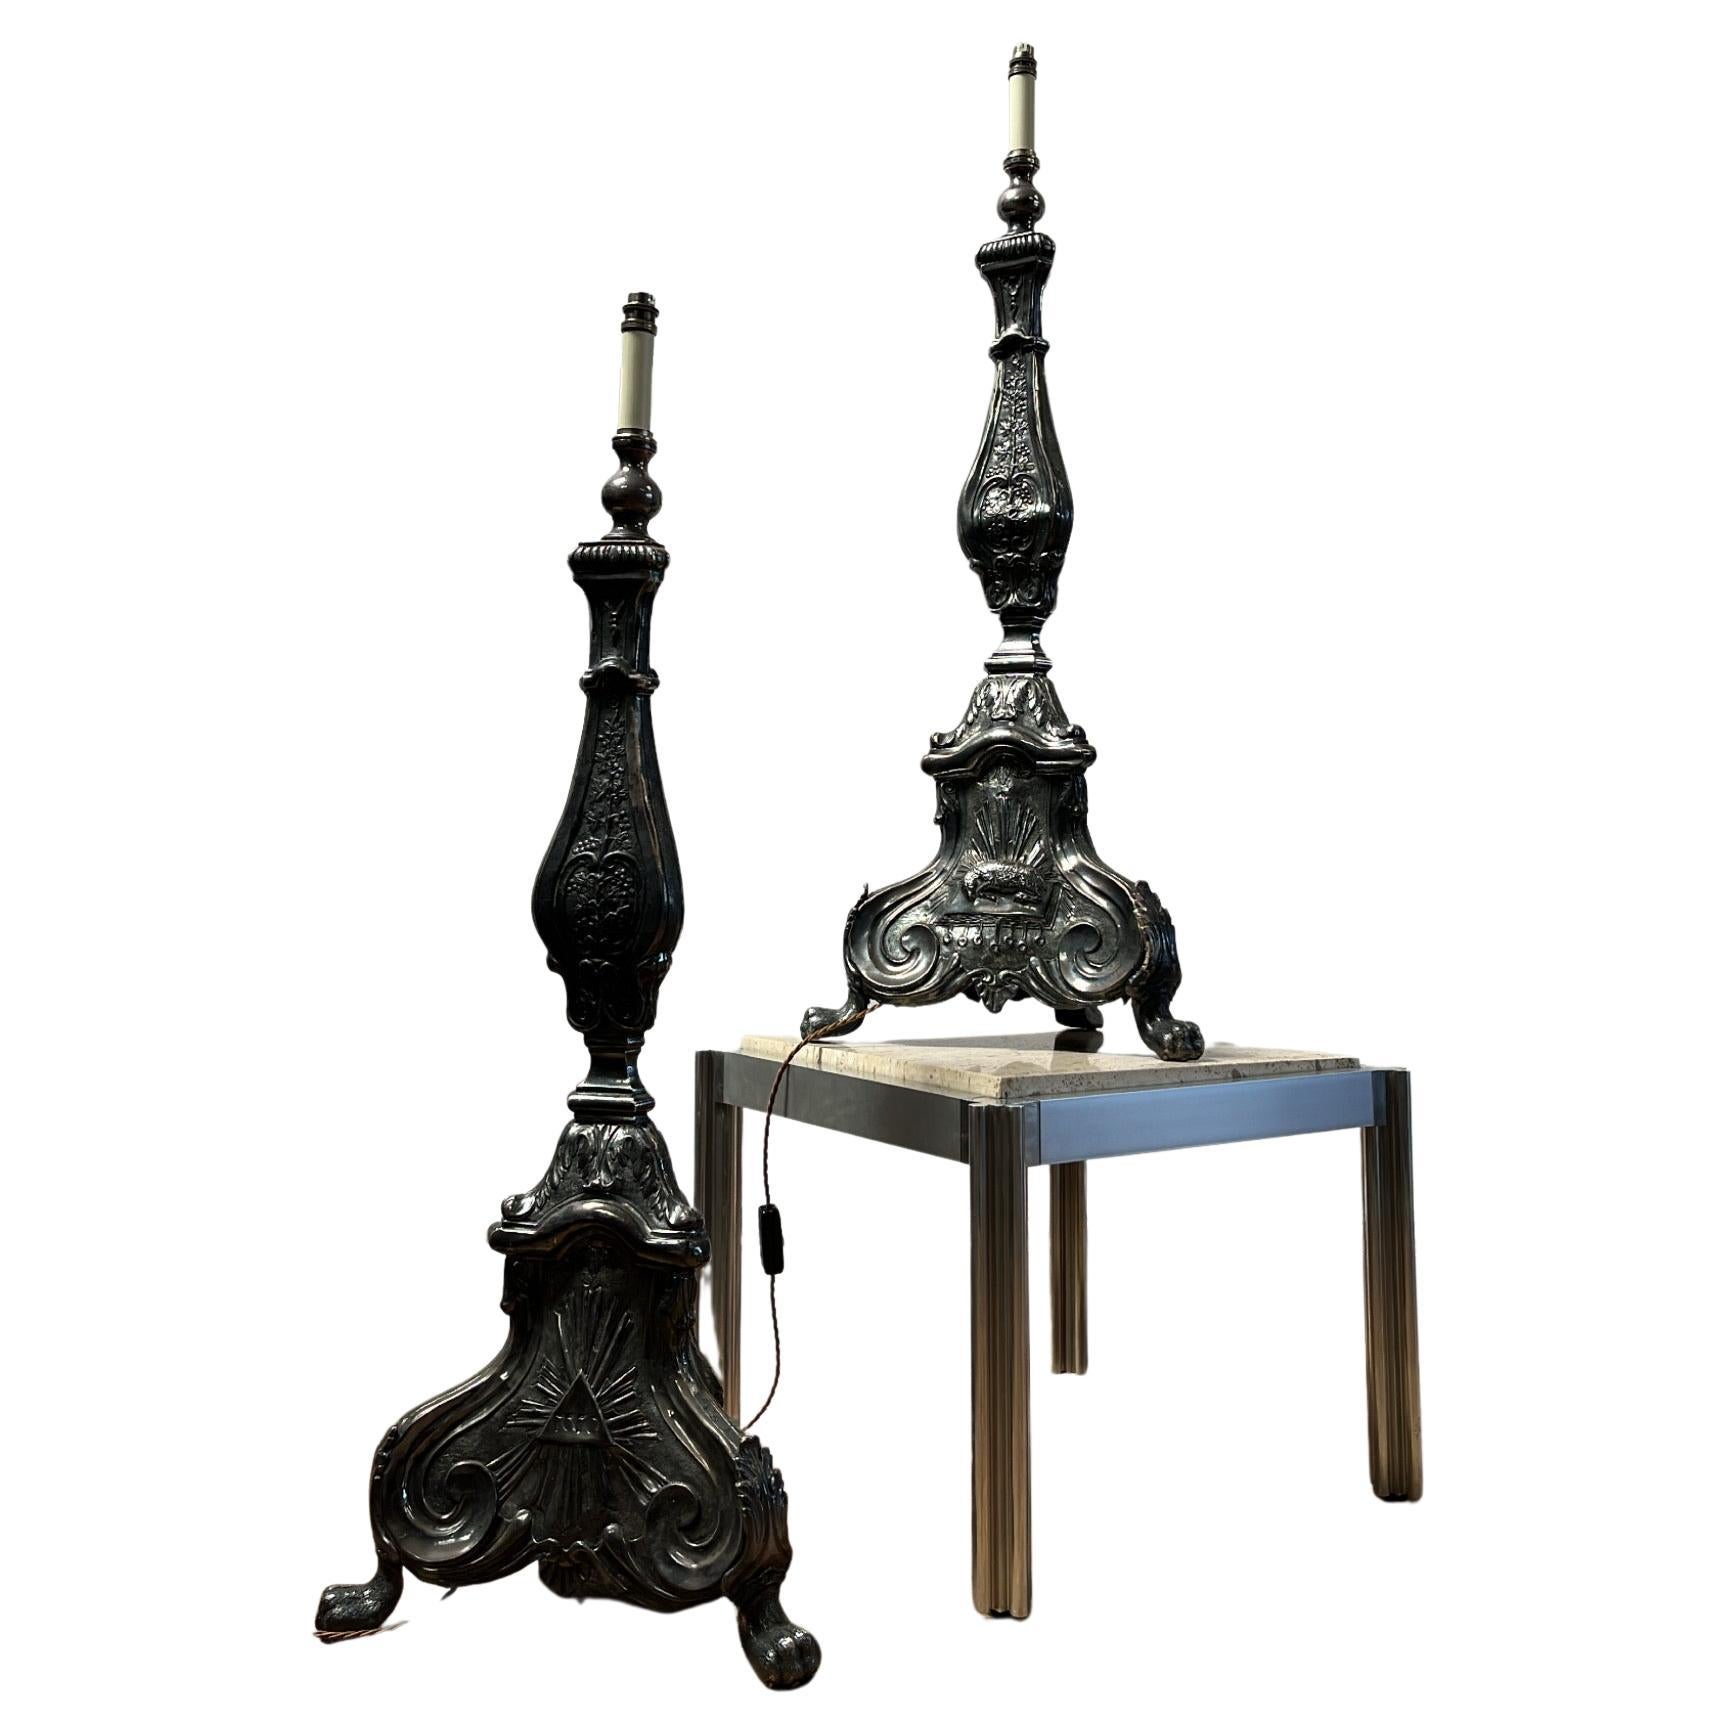 Fine Pair of Nineteenth Century Repousse Candlesticks